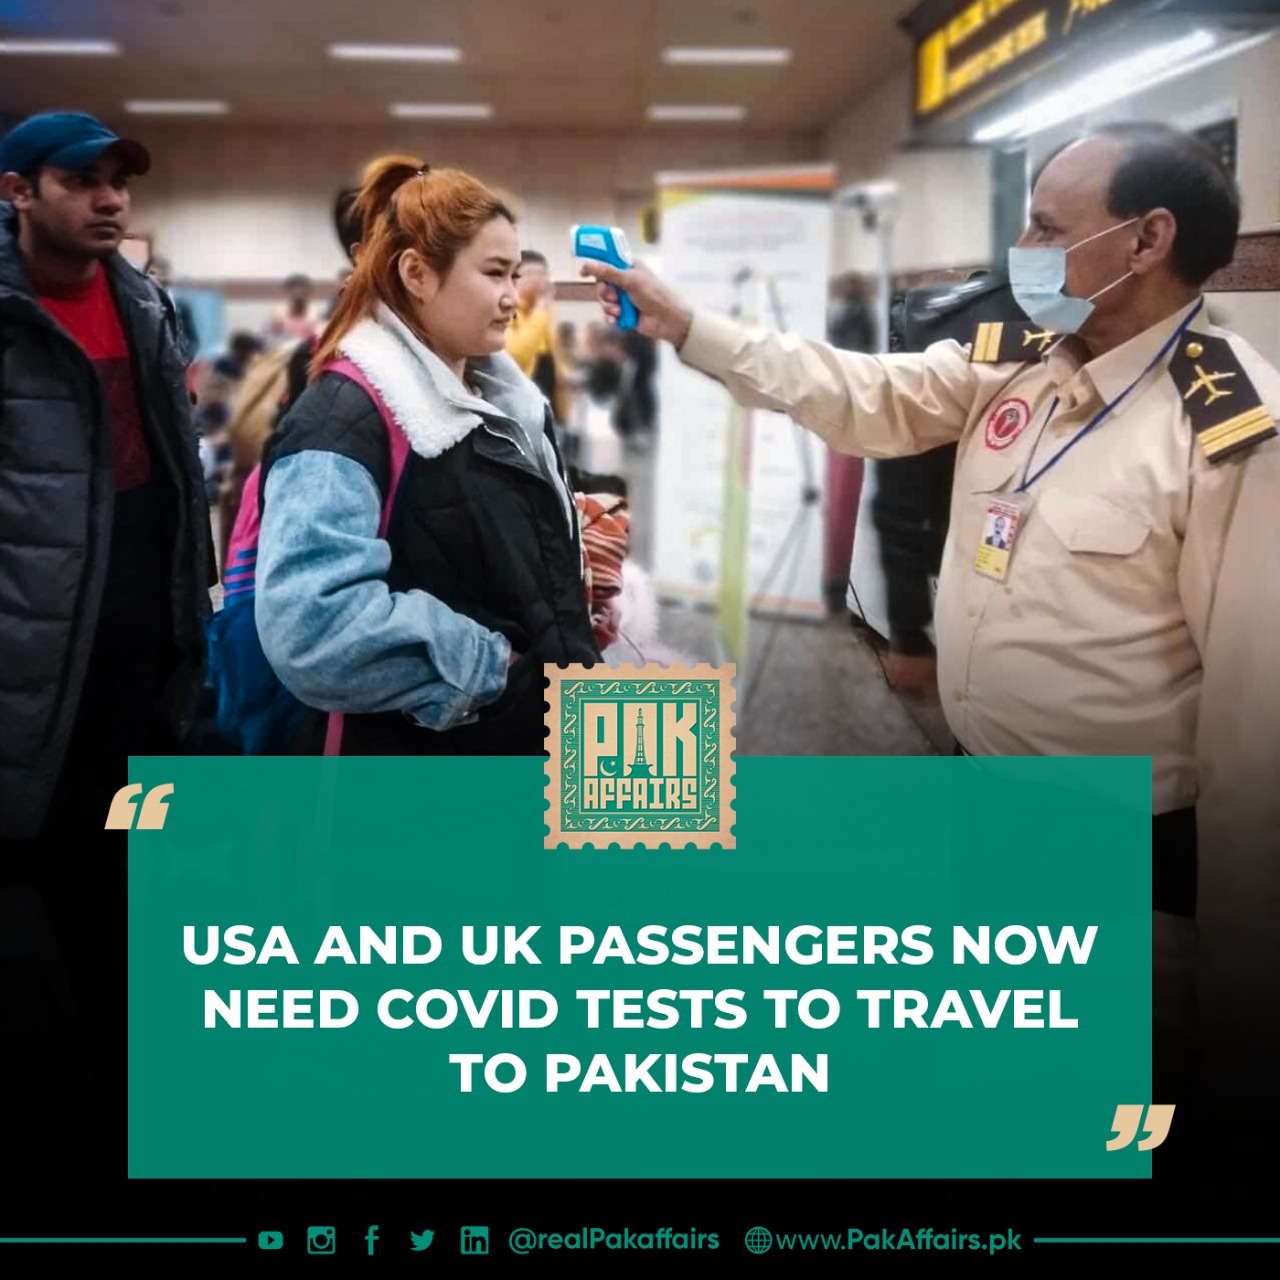 USA and UK passengers now need COVID tests to travel to Pakistan